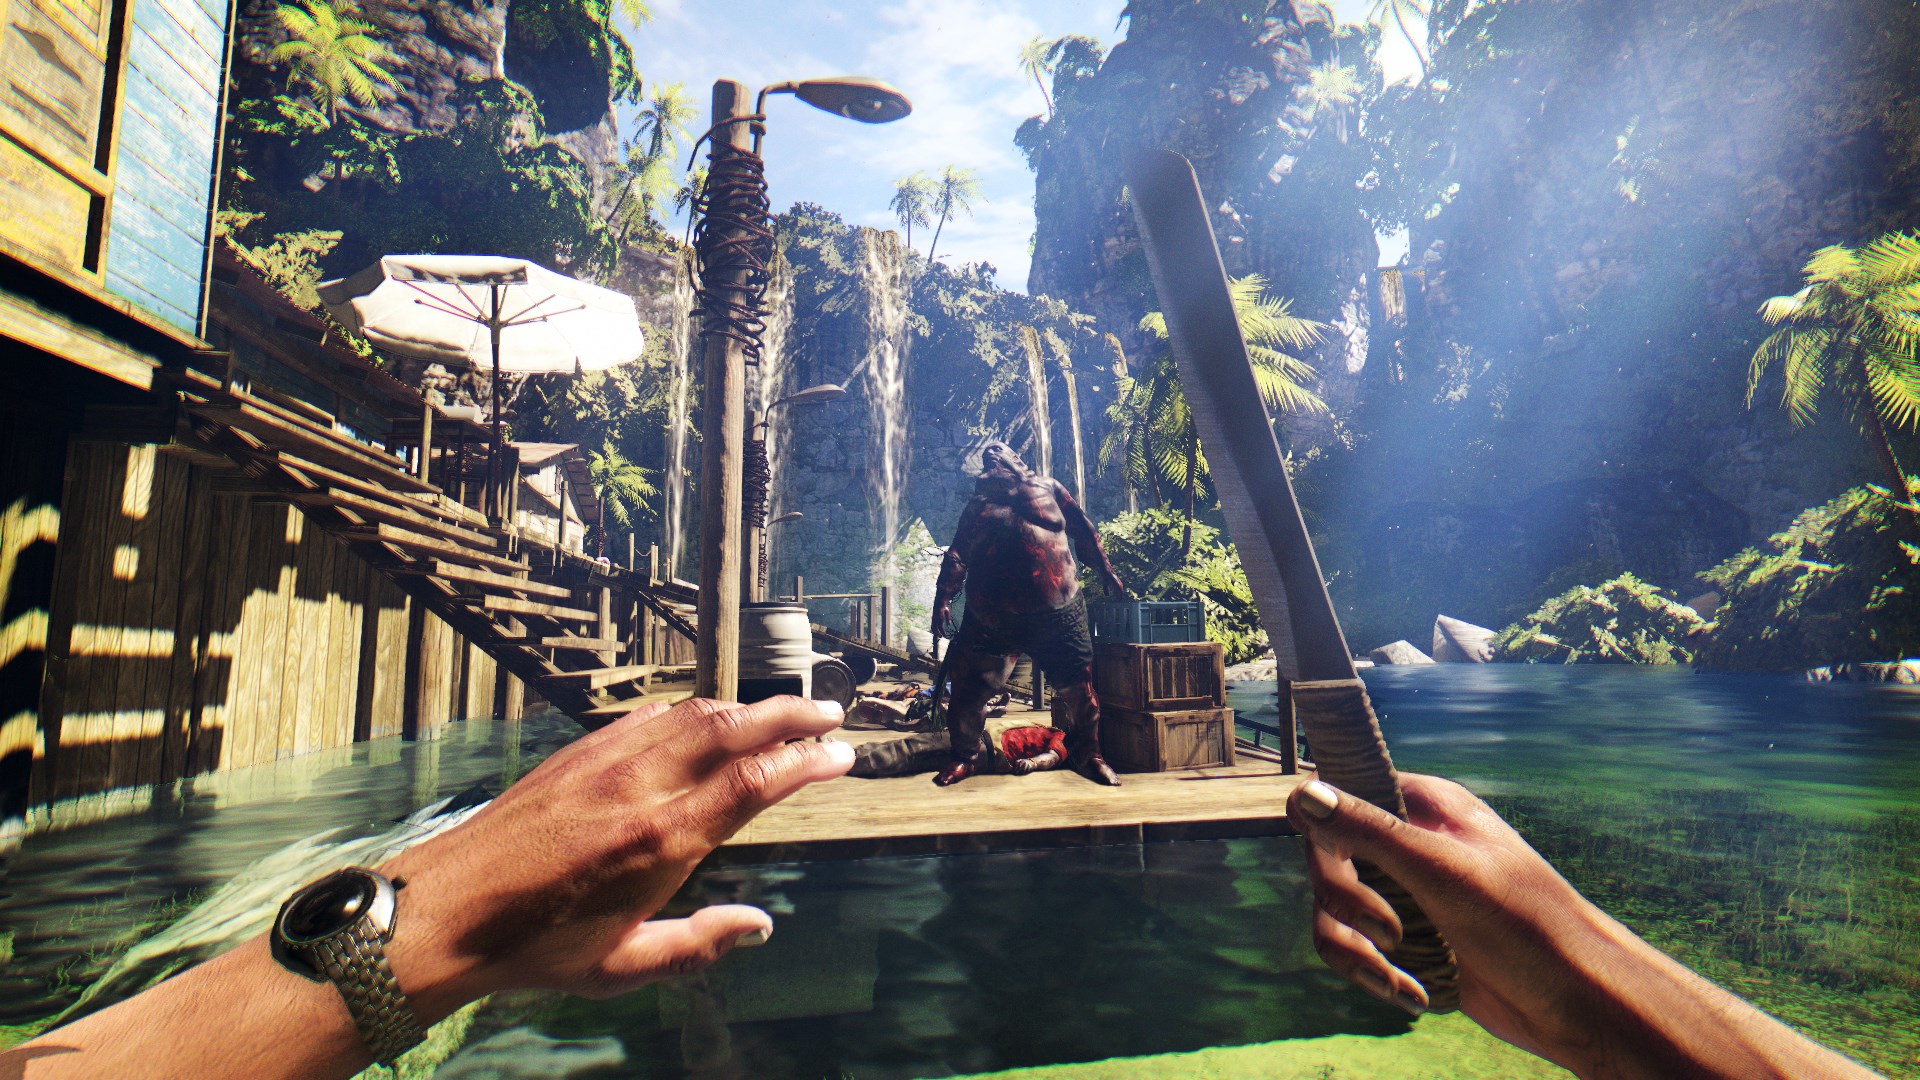 All Dead Island games released so far - check prices & availability